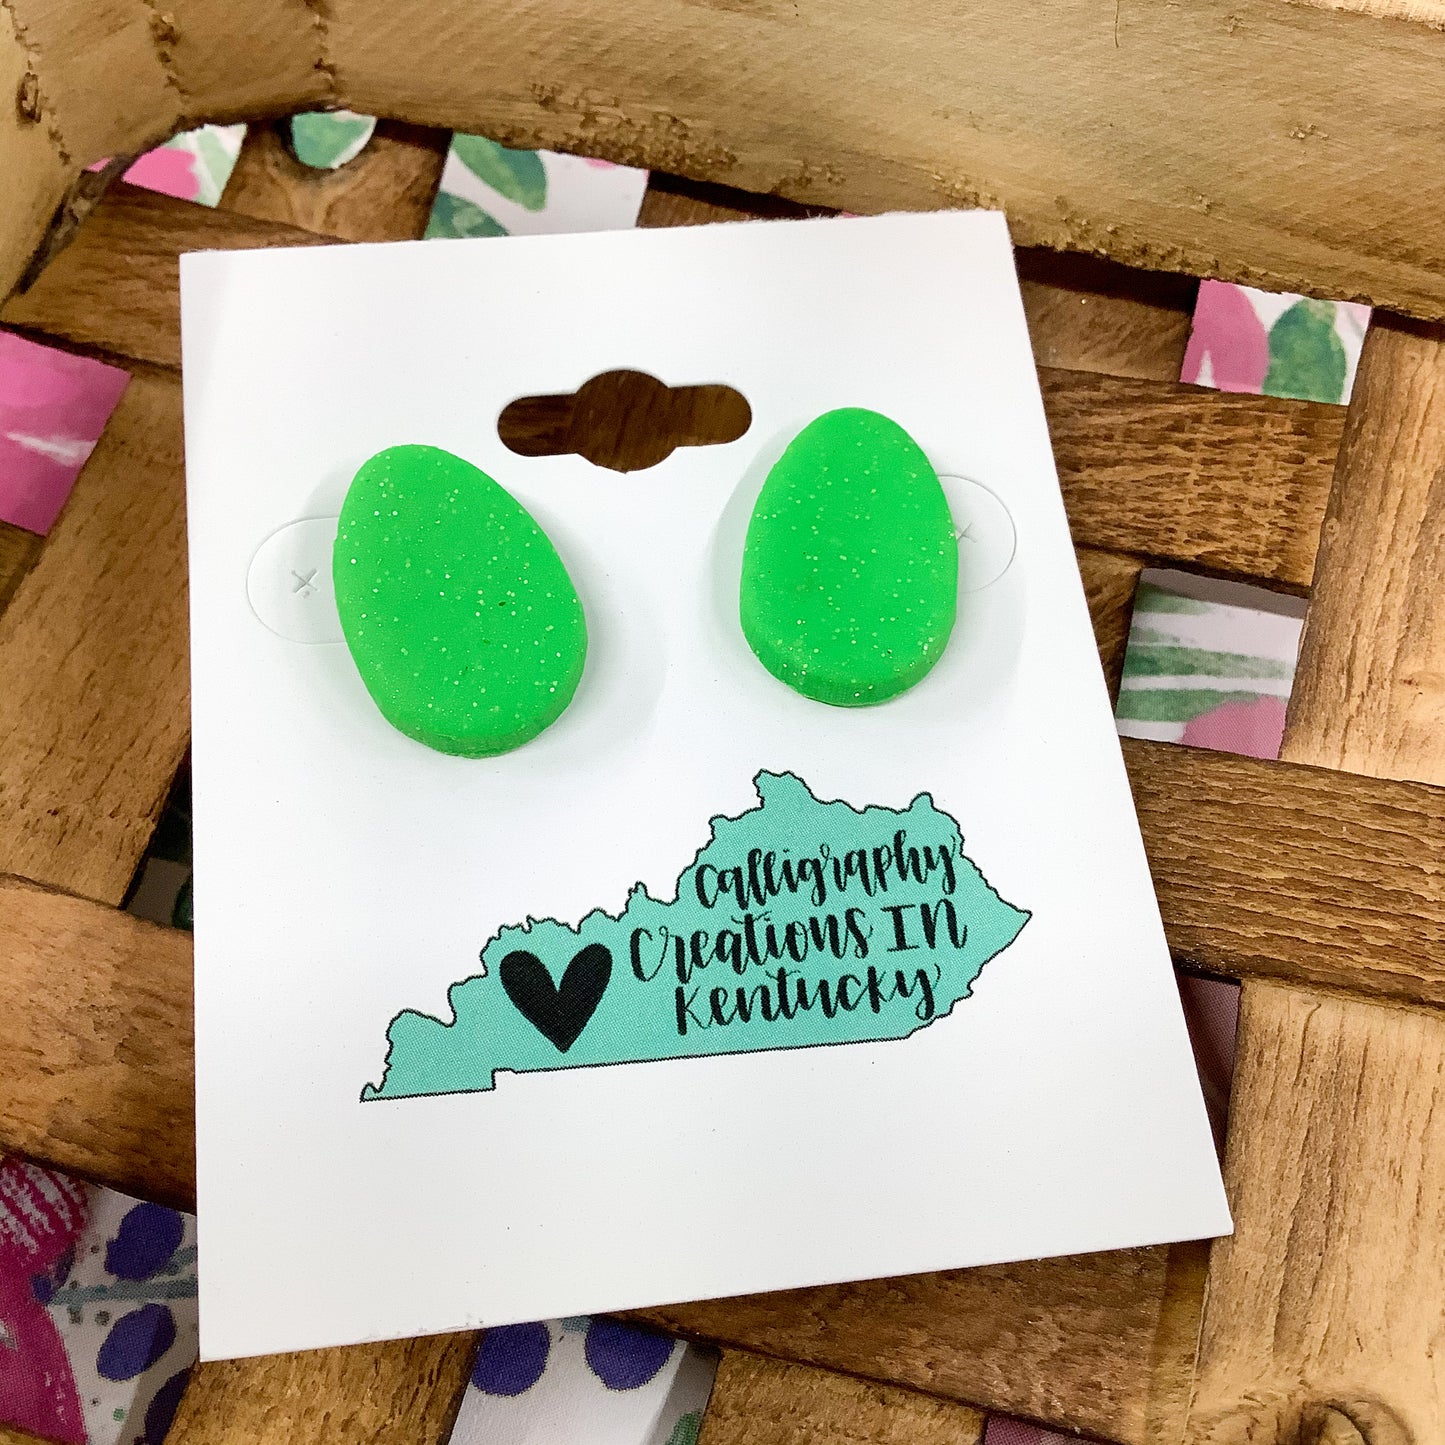 Shimmer Lime Egg Clay Studs